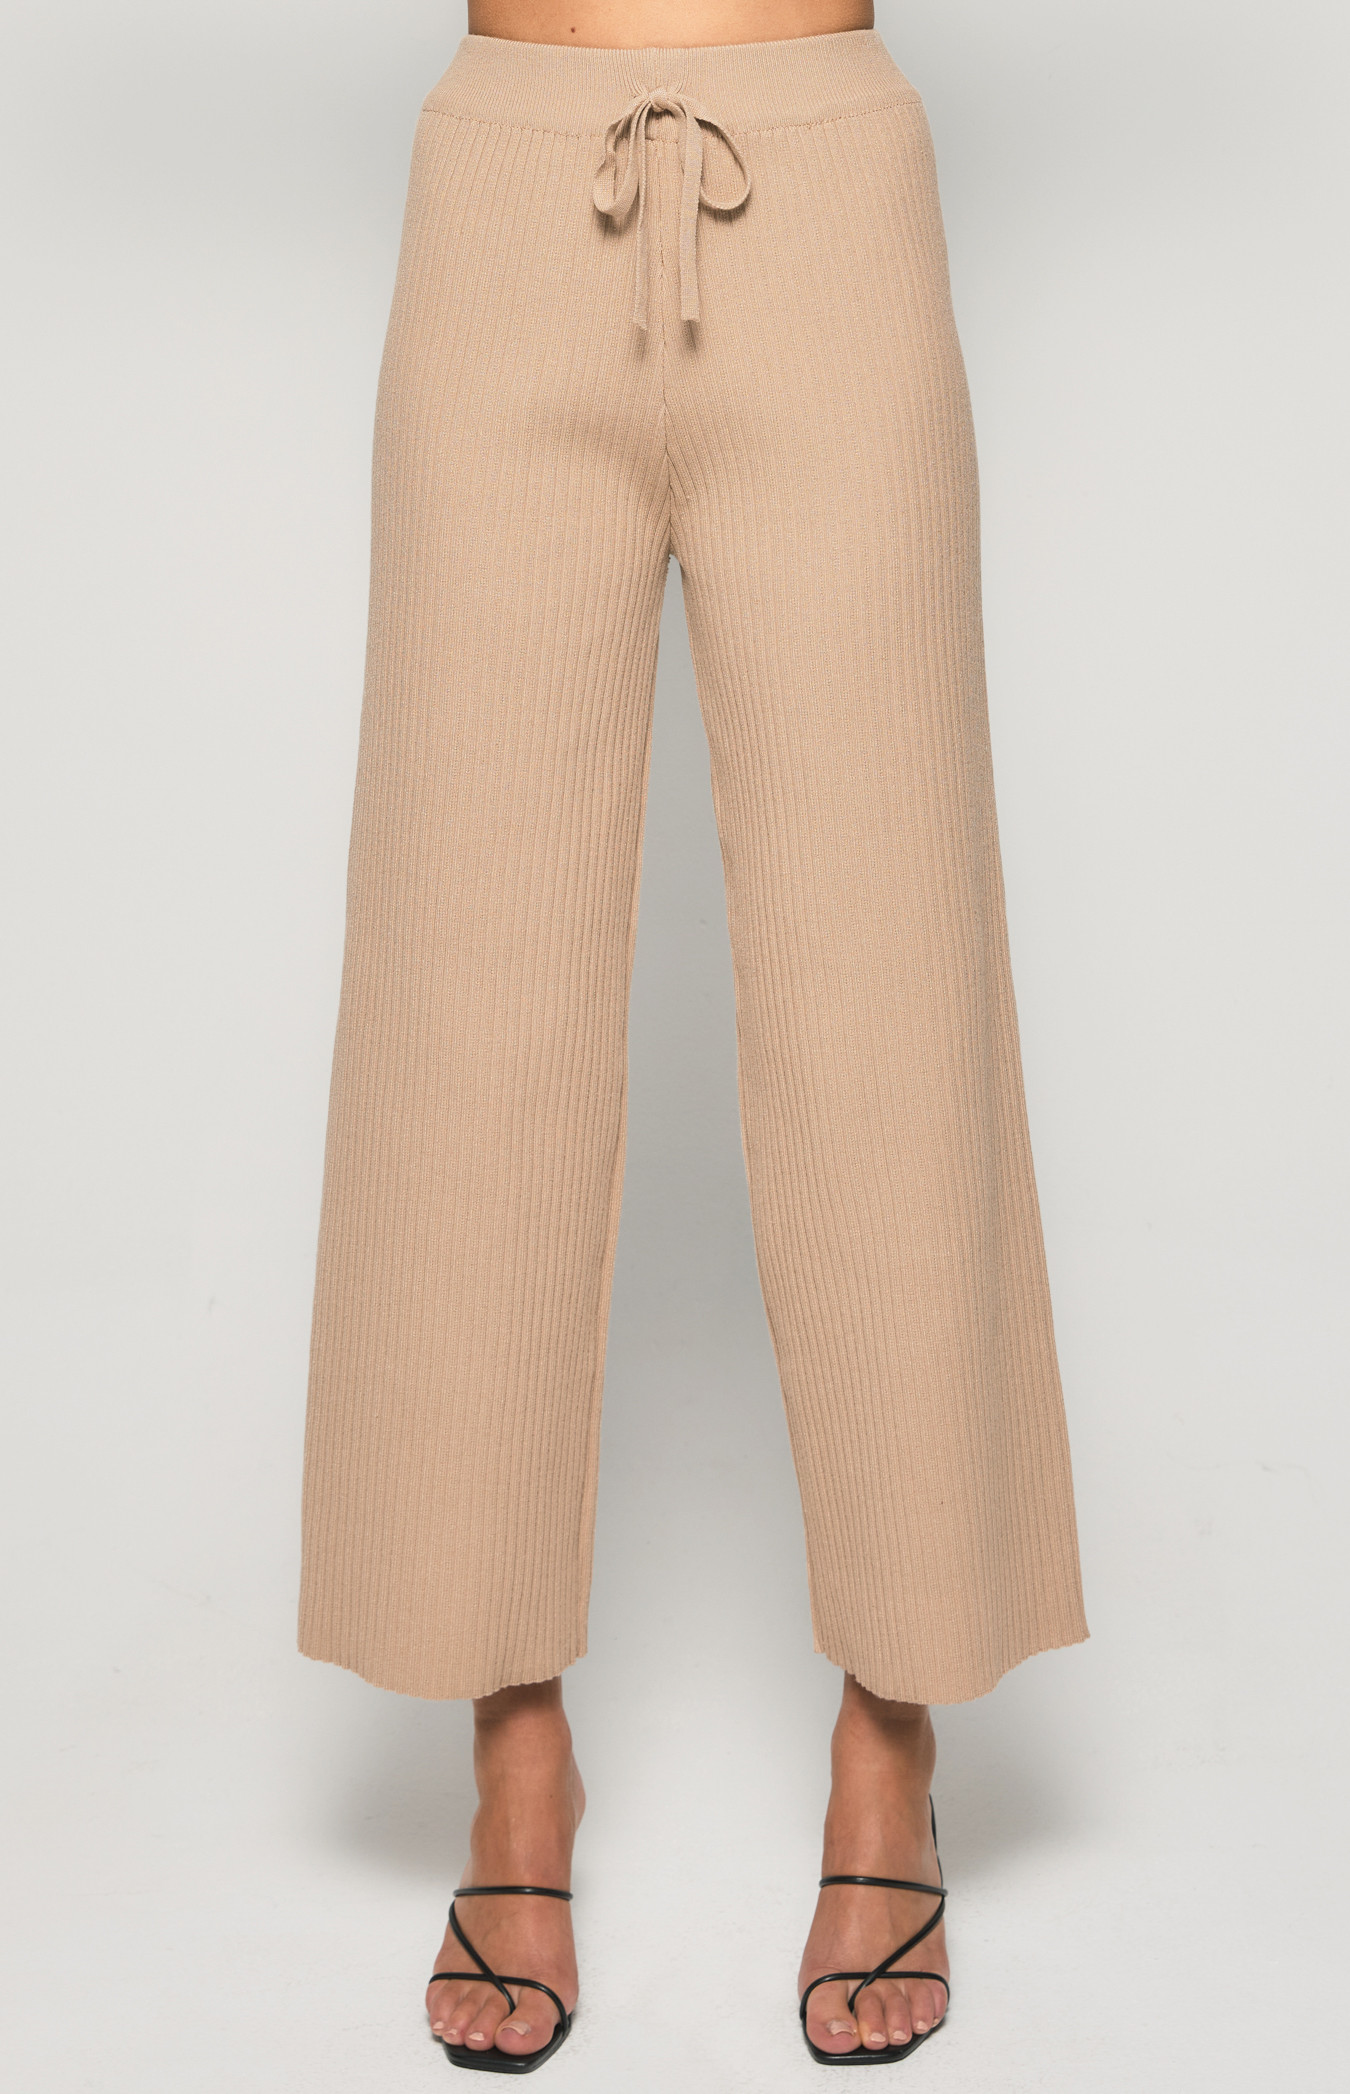 Wide Knitted Pants Beige  Pants, Knit pants, Knitted